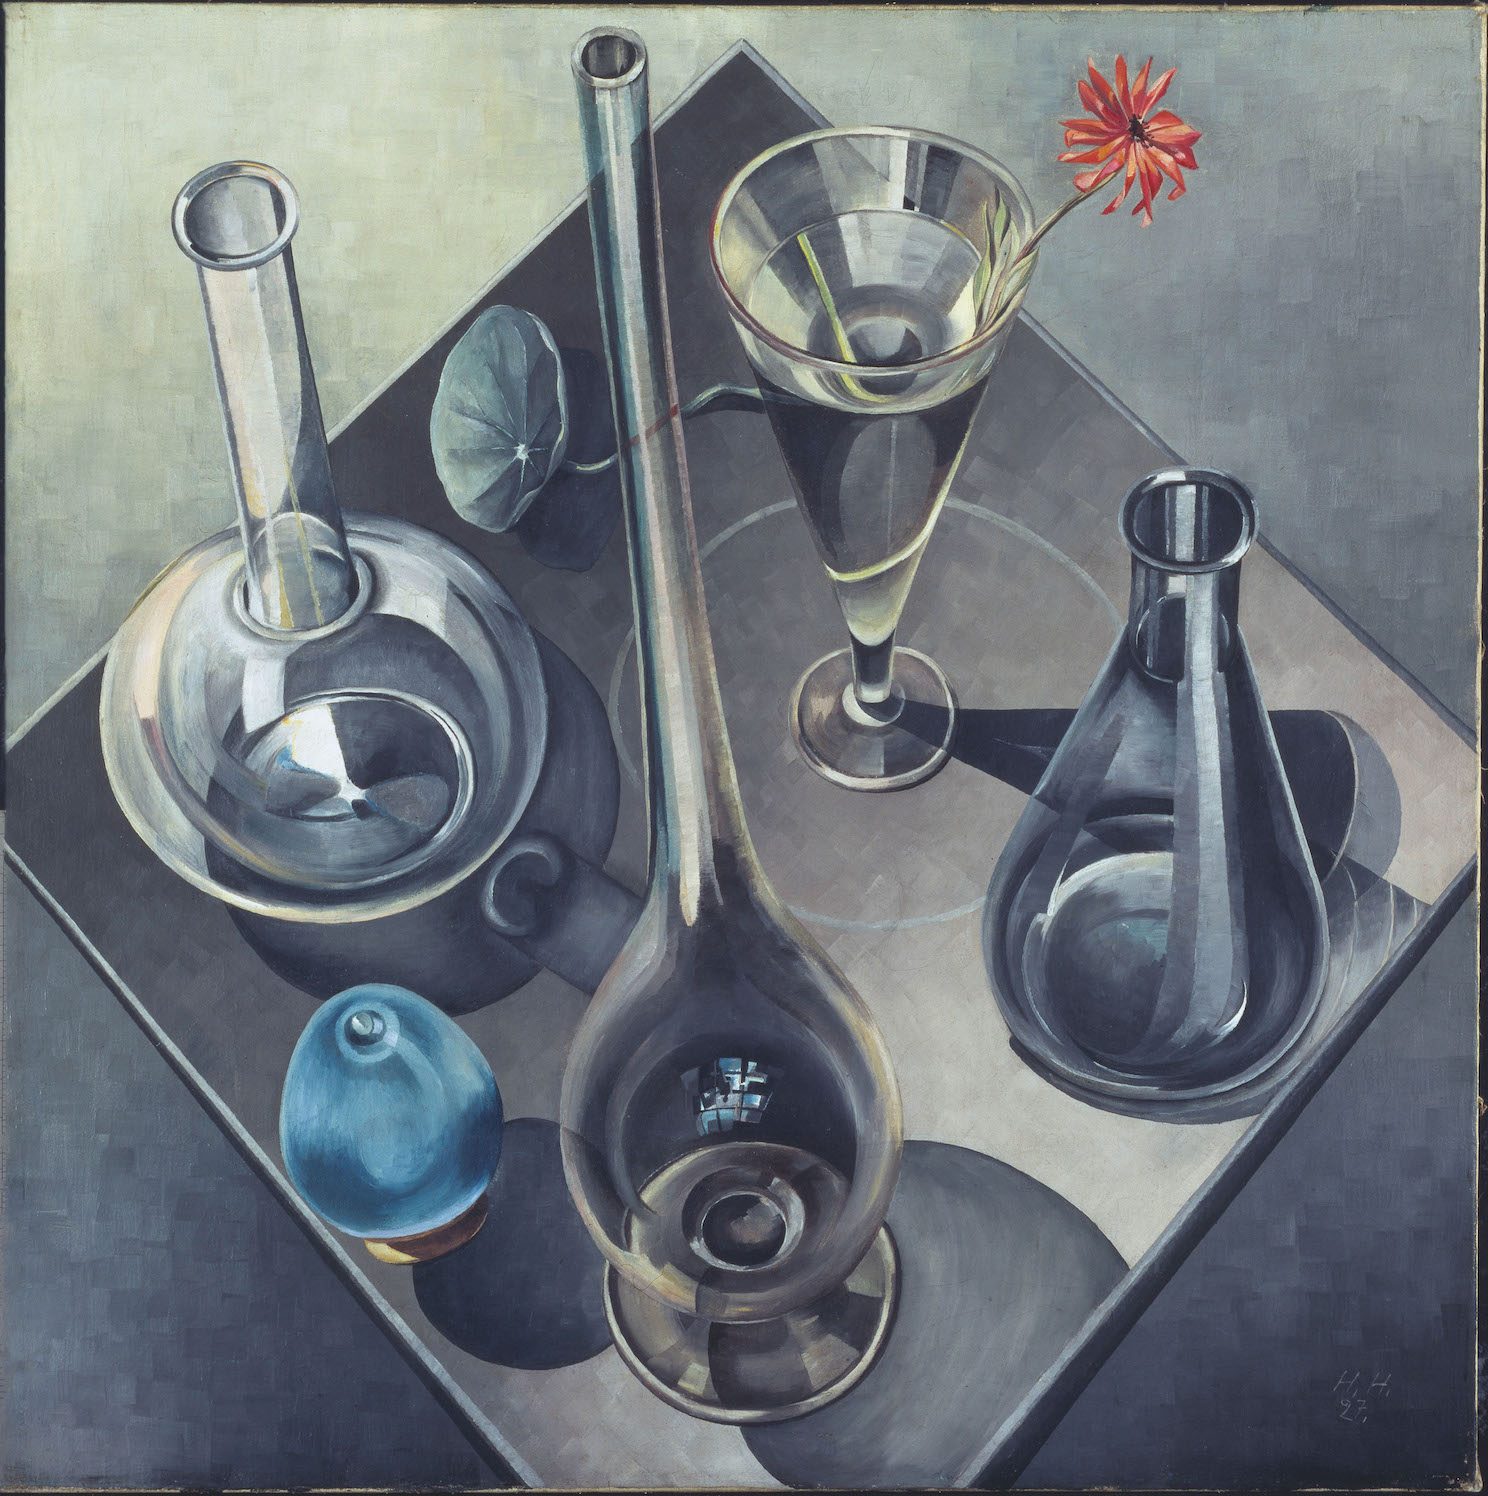 A painting of vases and other glassware